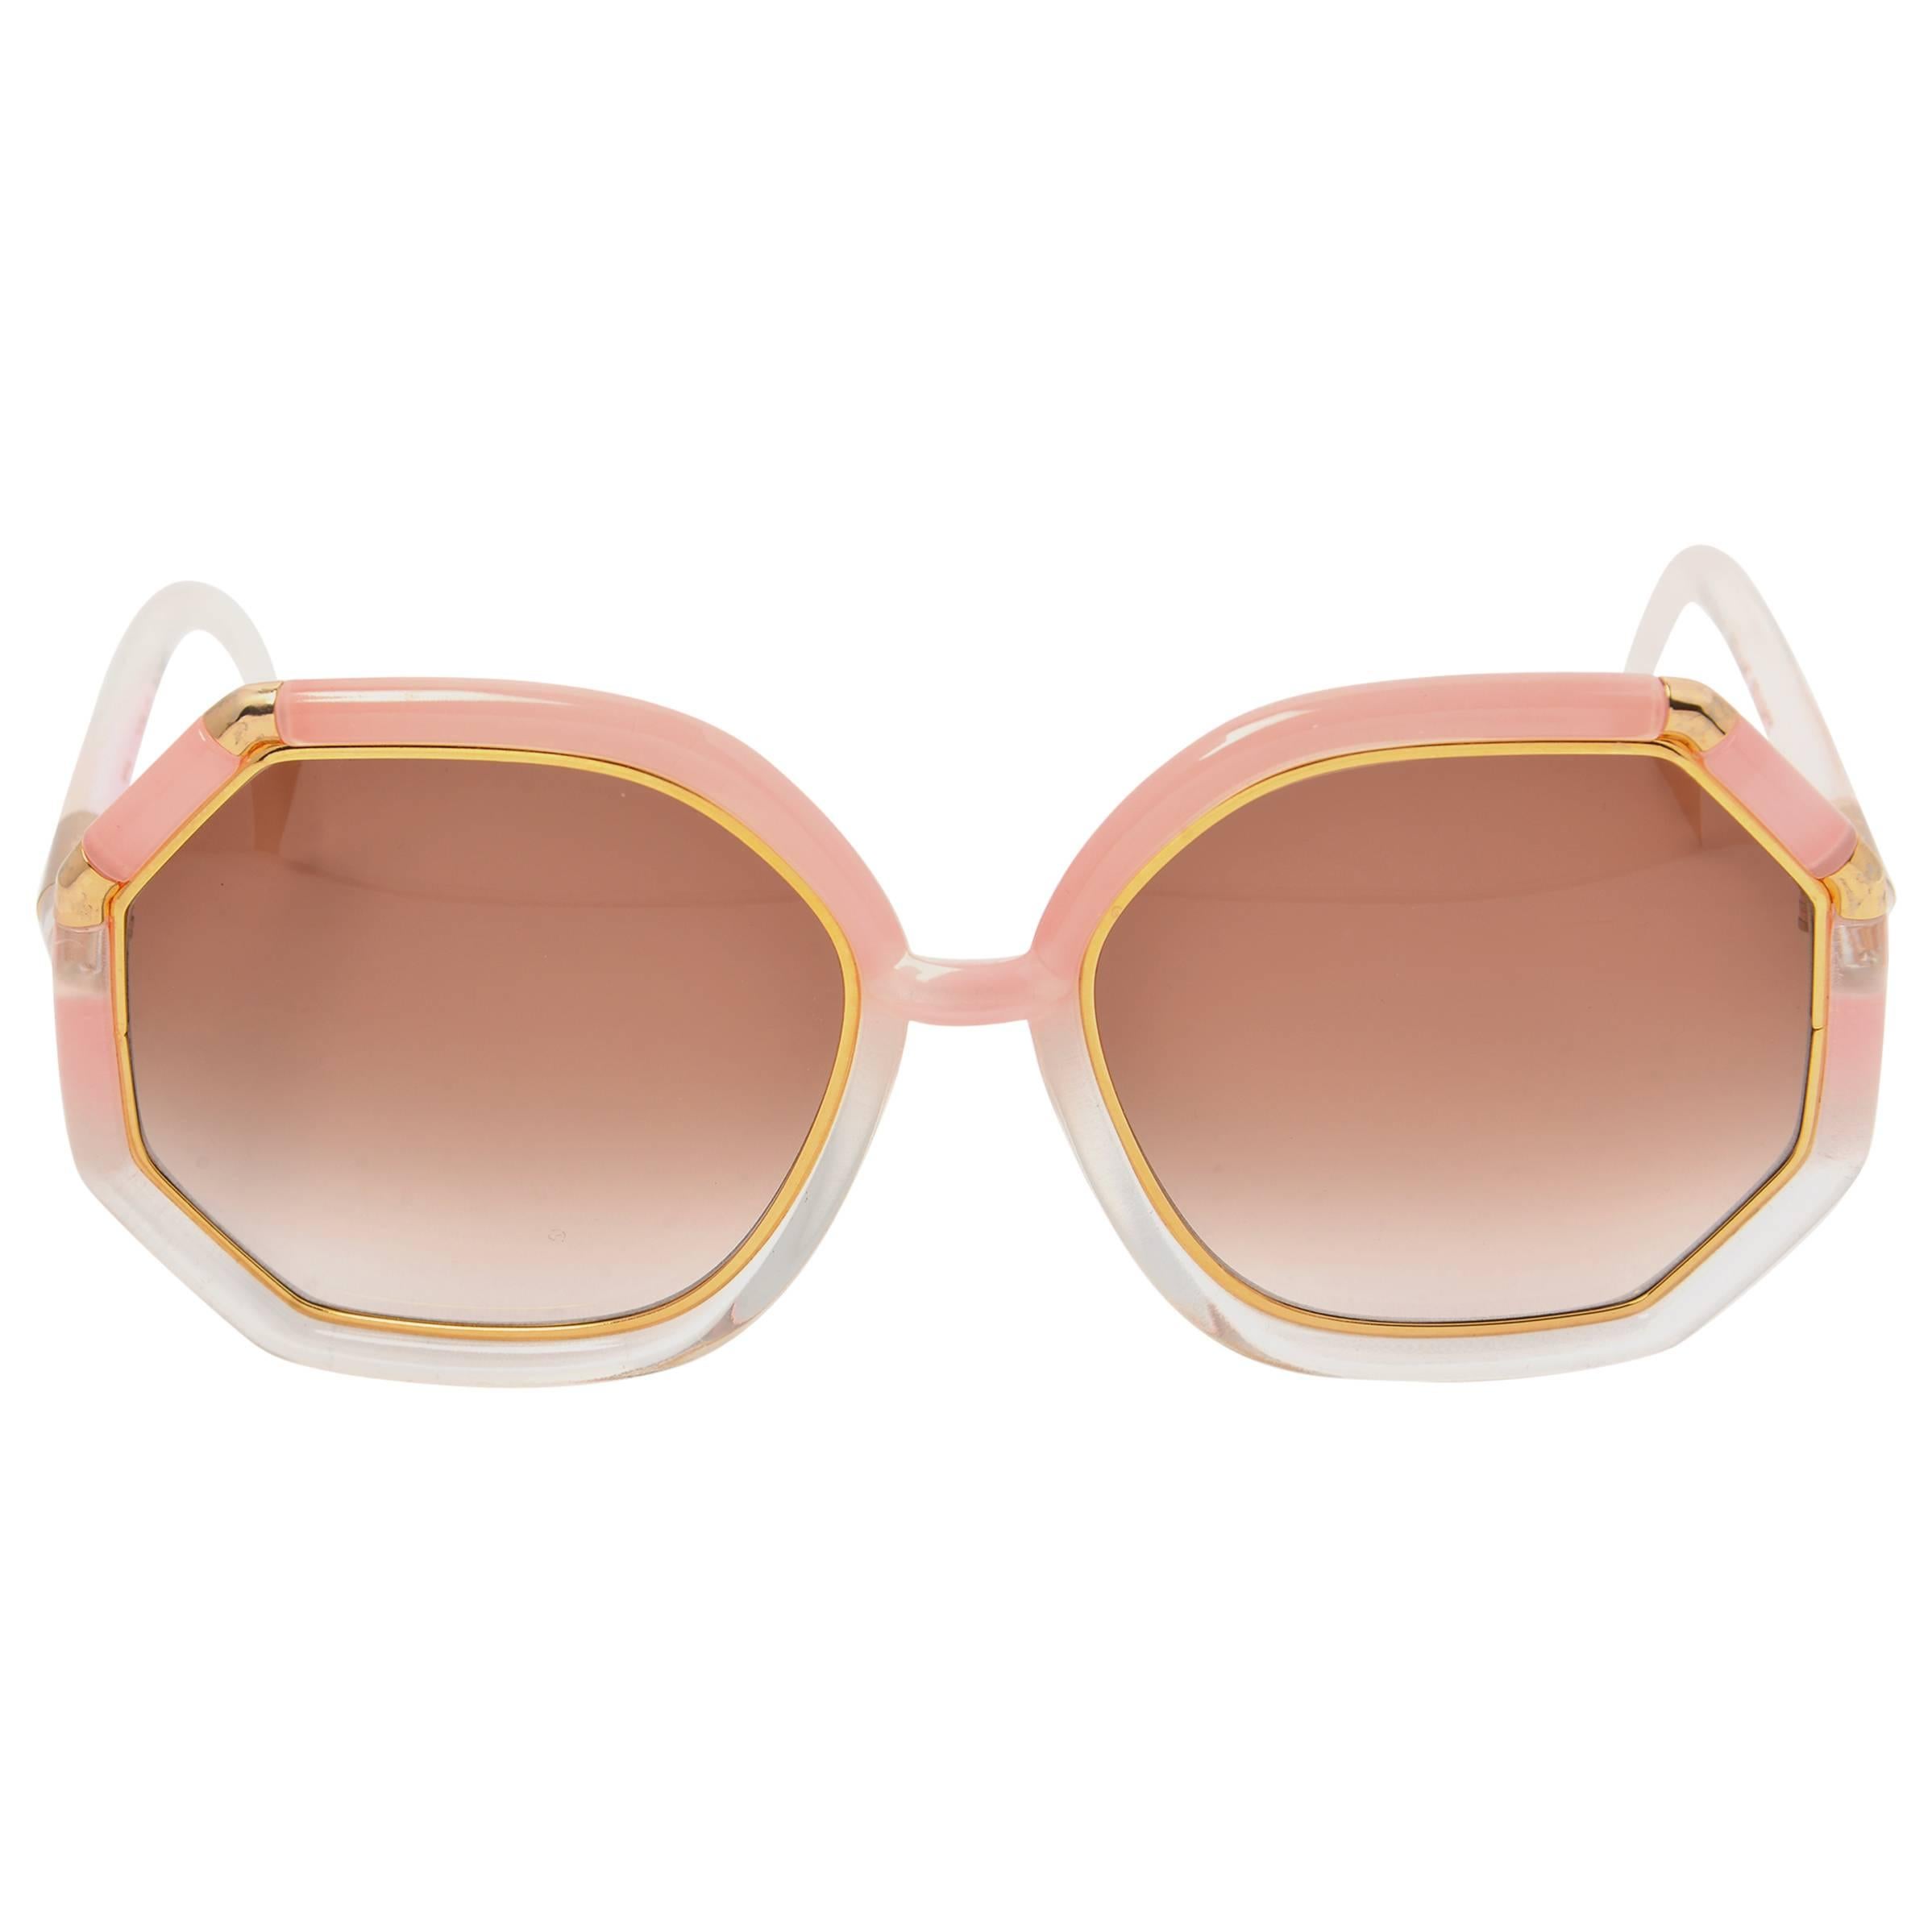 Classic 1970s Ted Lapidus Pink and Gold Oversized Sunglasses